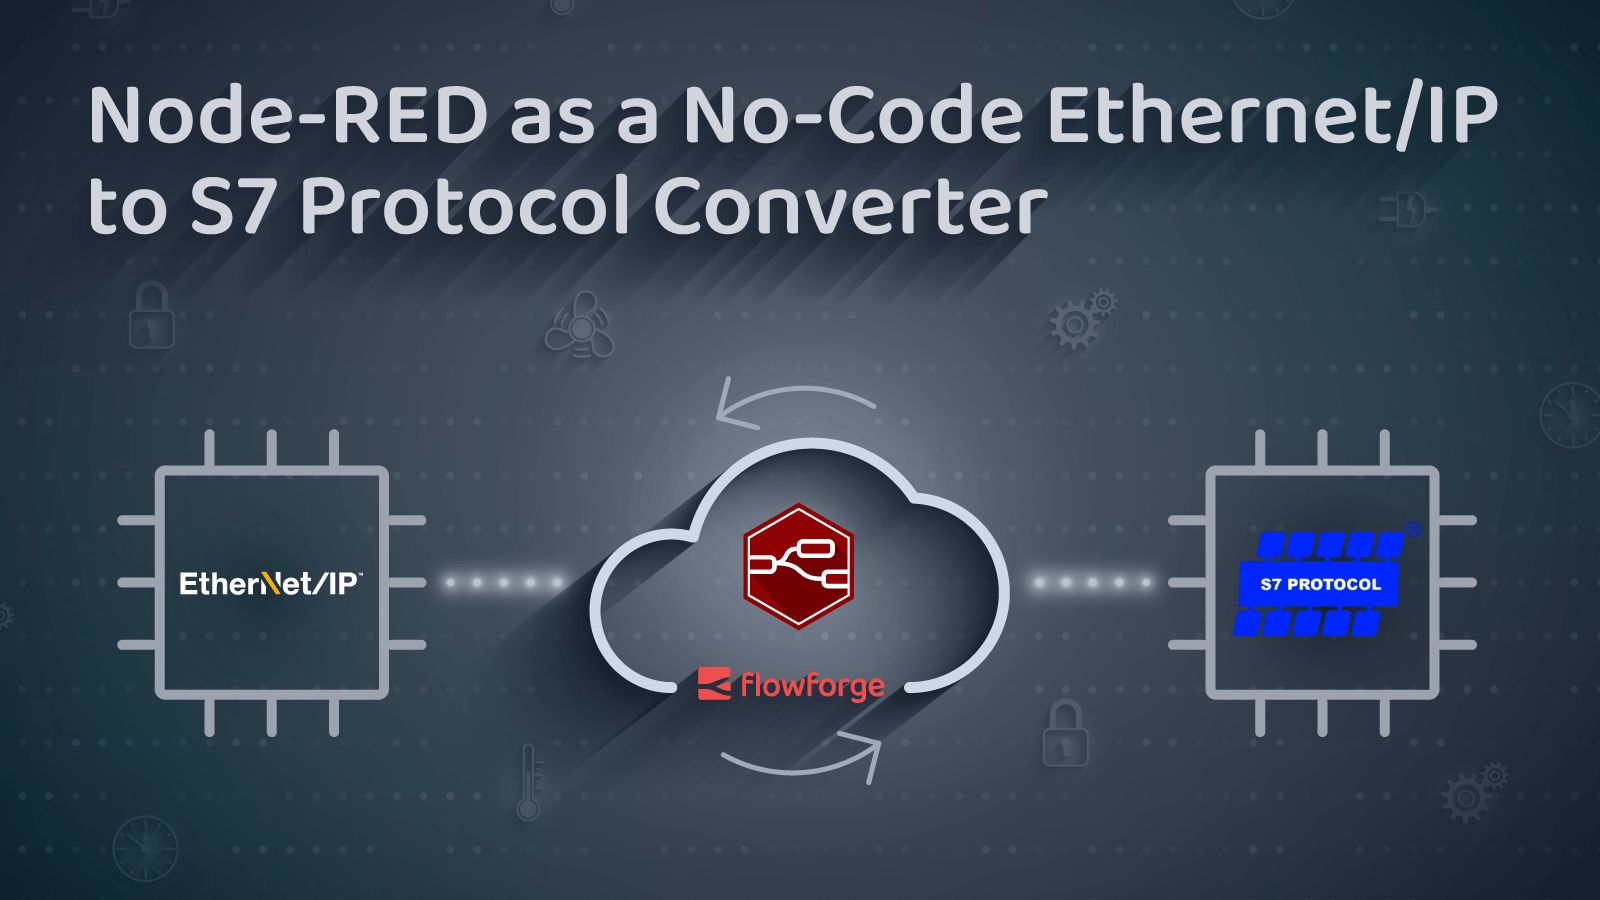 Image representing Node-RED as a No-Code Ethernet/IP to S7 Protocol Converter